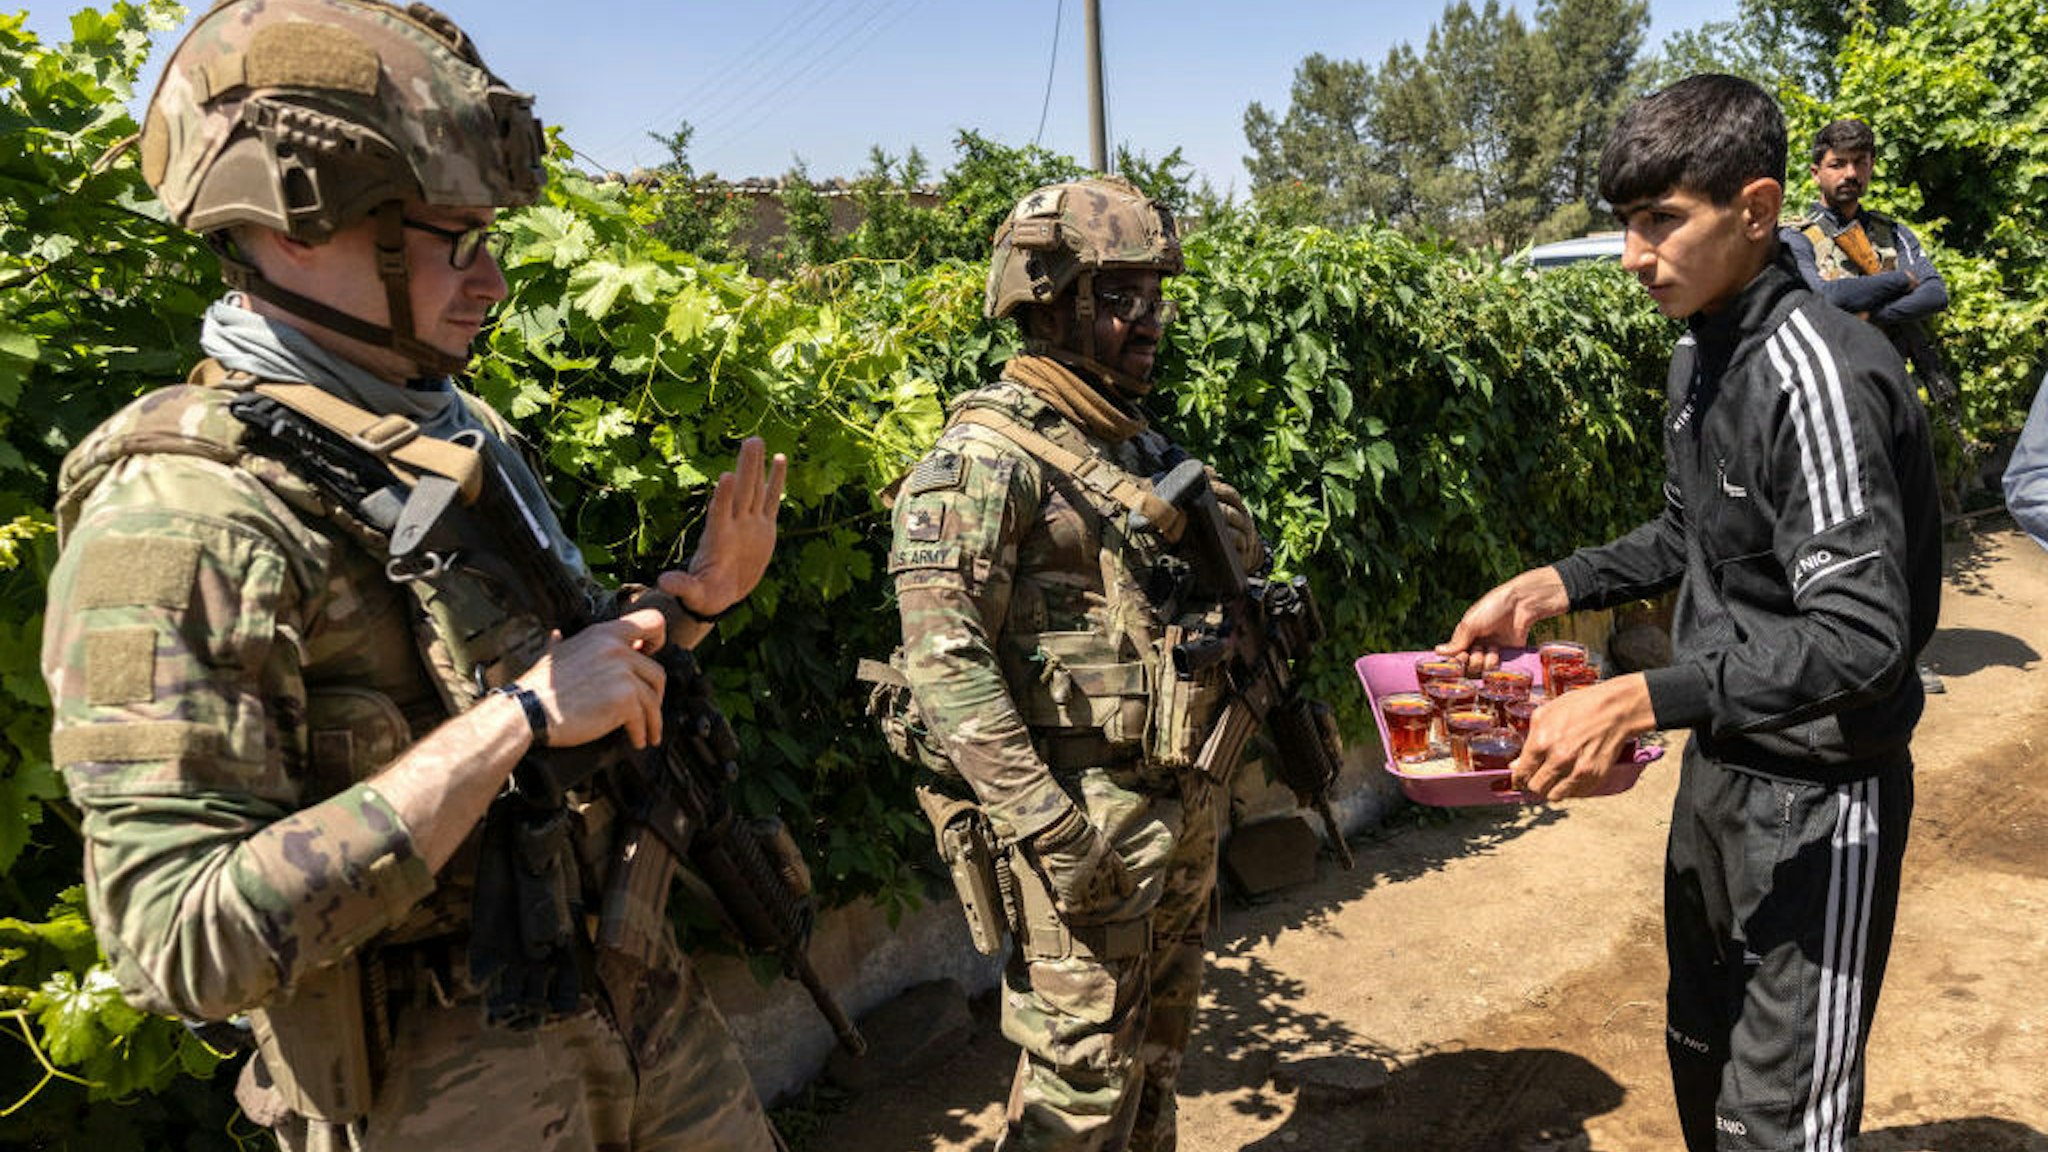 A U.S. Army soldier declines the offer of tea as his commanding officer and allied troops meet with local villagers on May 26, 2021 near the Turkish border in northeastern Syria. U.S. forces, part of Task Force WARCLUB operate from remote combat outposts in the area, coordinating with the Kurdish-led Syrian Democratic Forces (SDF) in combatting residual ISIS extremists and deterring pro-Iranian militia. (Photo by John Moore/Getty Images)